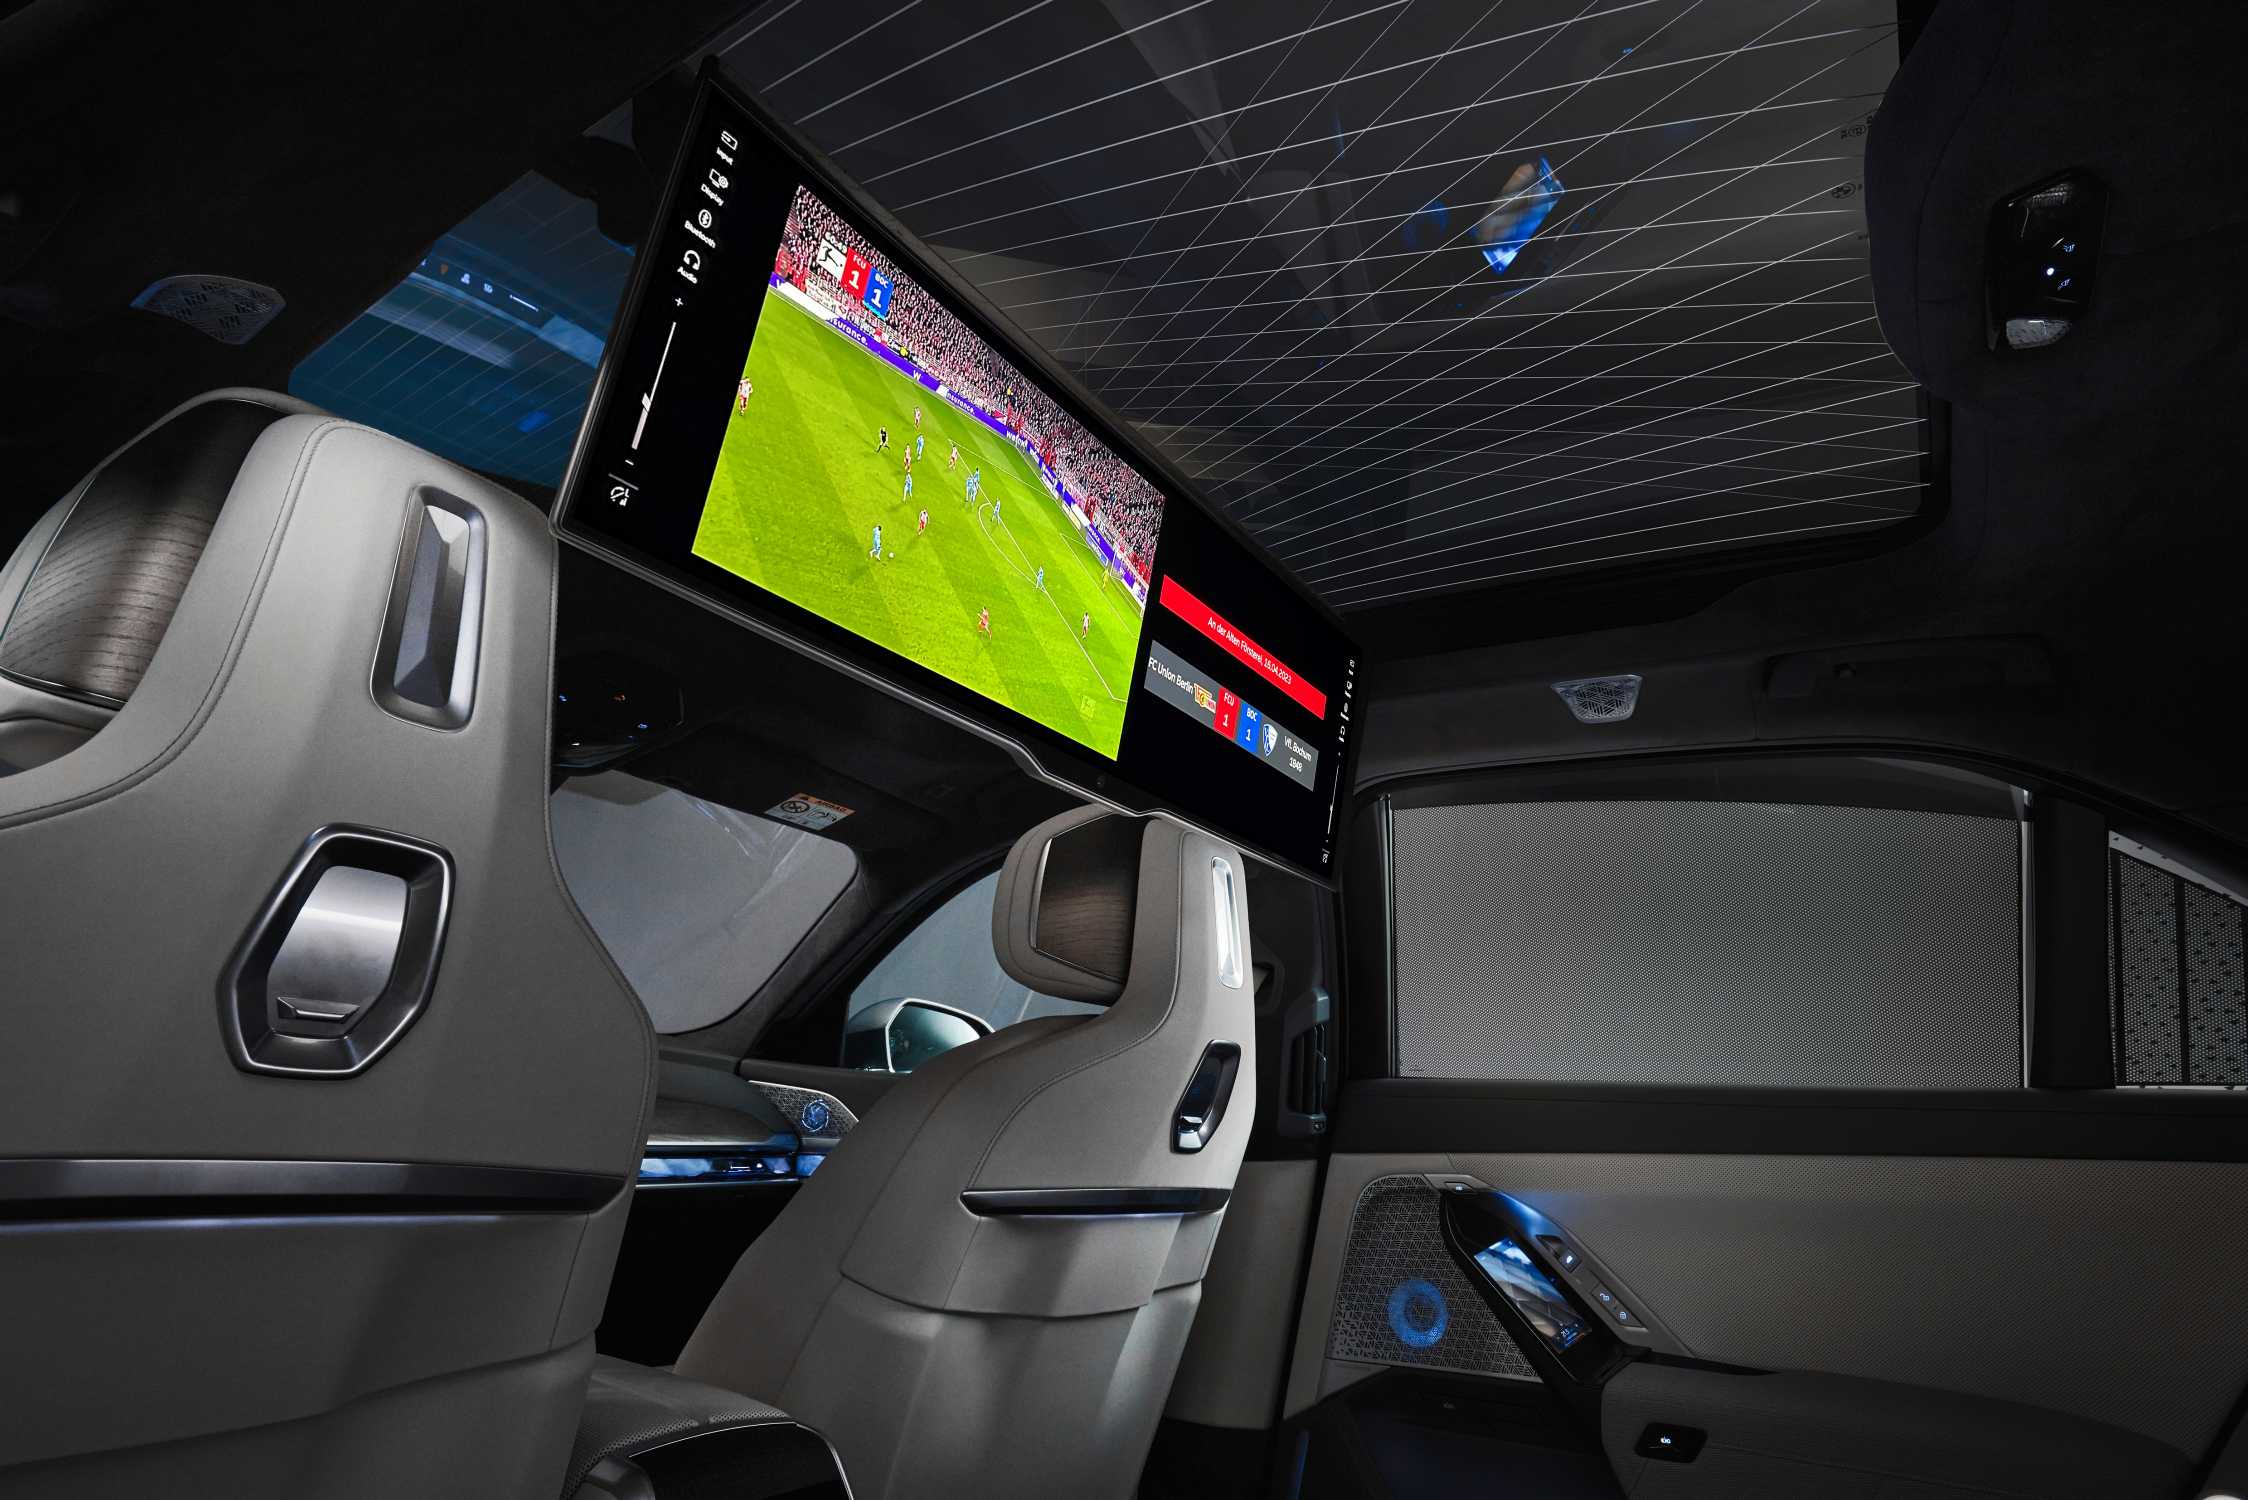 Next level in-car football streaming BMW brings Bundesliga pilot application to the BMW Theatre Screen.